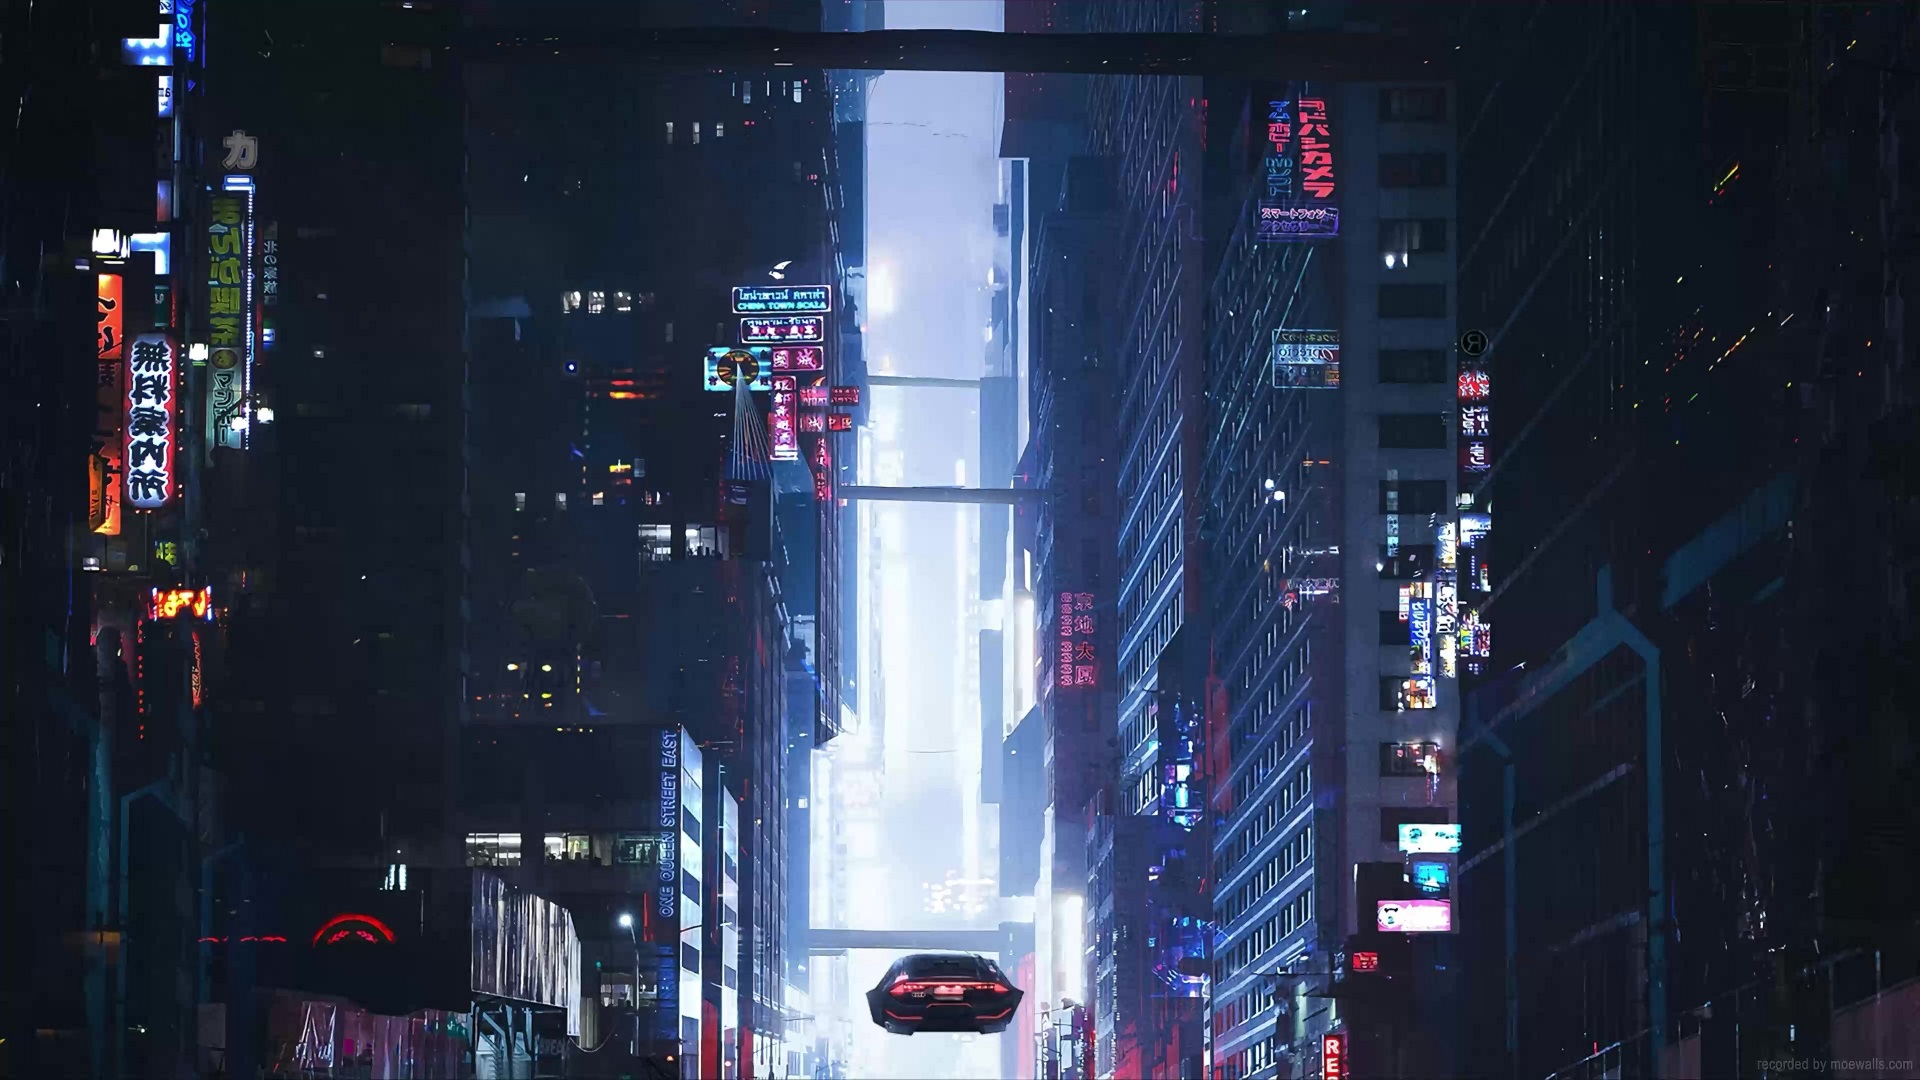 Cat Looking At Cyberpunk City In The Rain Live Wallpaper - MoeWalls on Make  a GIF